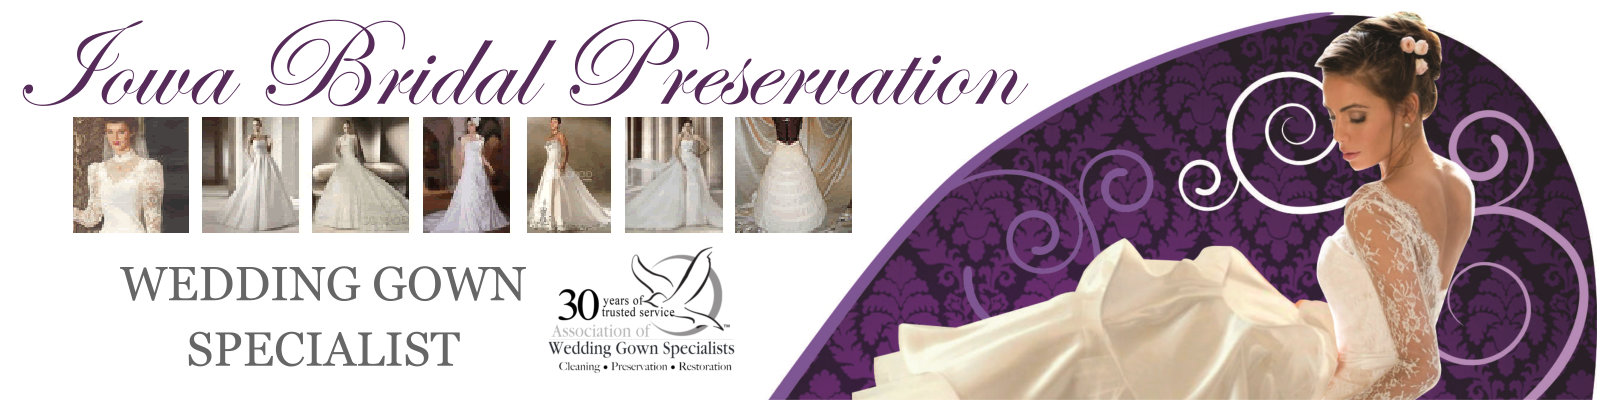 Couture Cleaning - Iowa Bridal Preservation